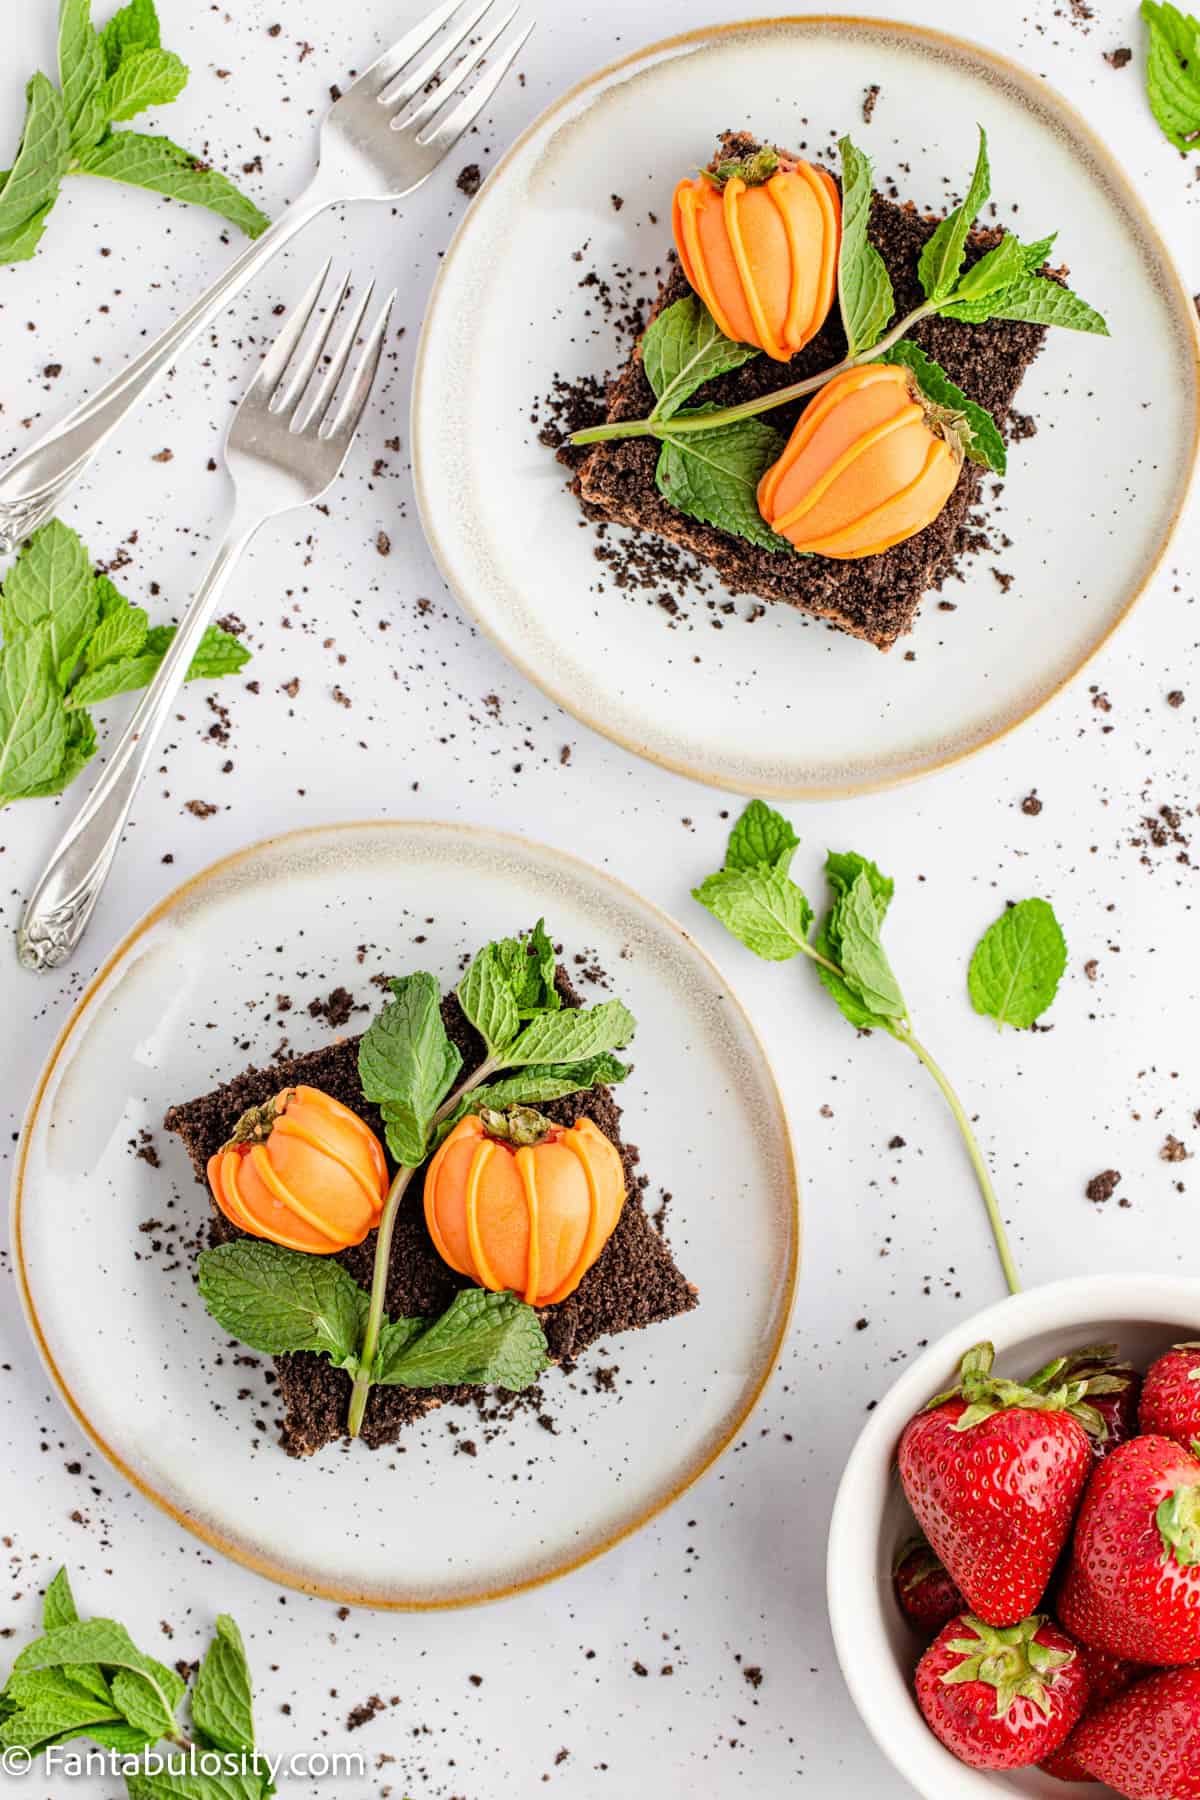 Brownies topped with chocolate covered strawberry pumpkins are plated on white plates surrounded by fresh mint and a bowl full of bright red strawberries